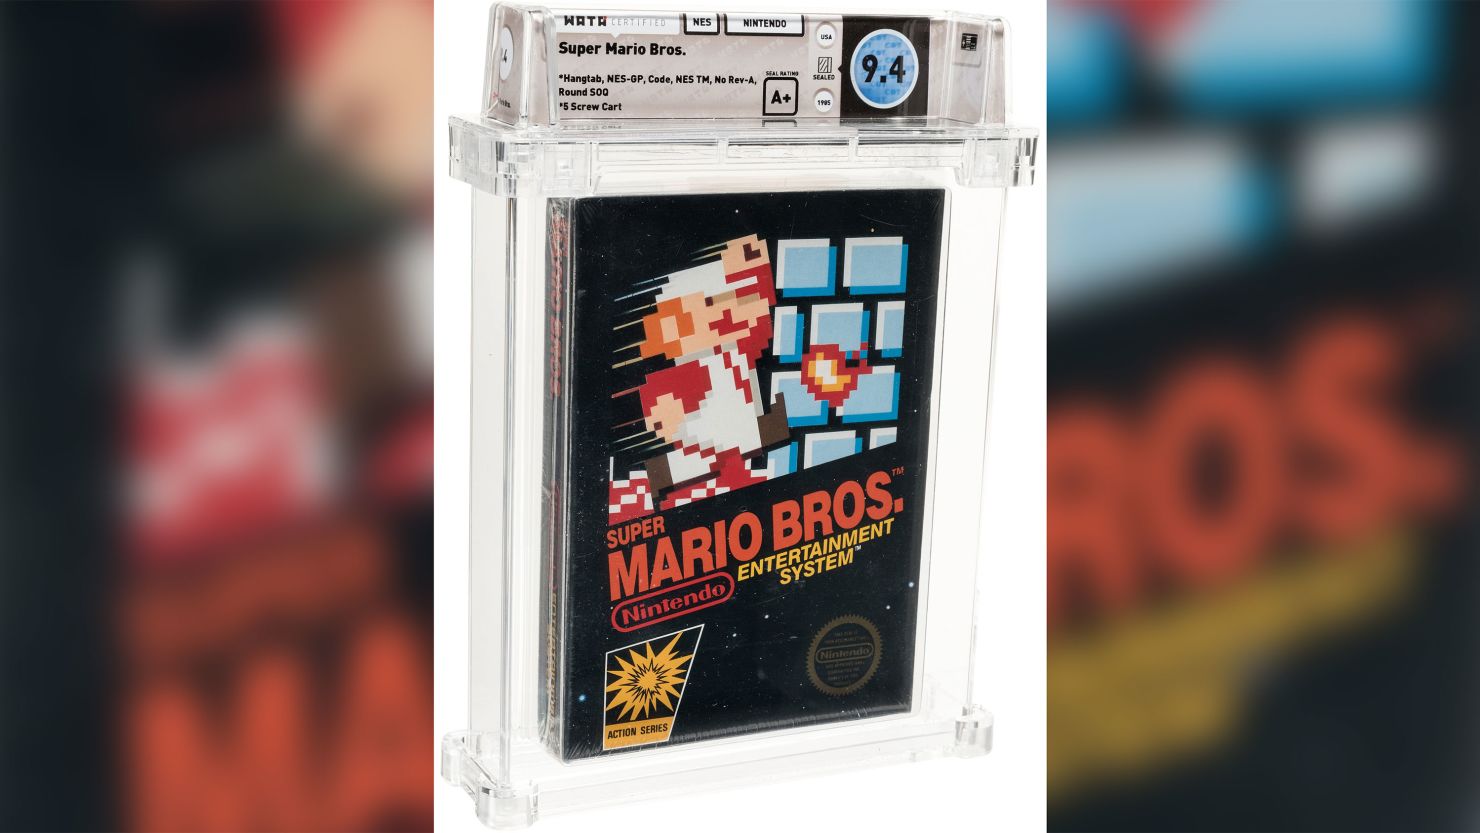 An unopened copy of the Super Mario Bros. video game sold for a record $114,000.